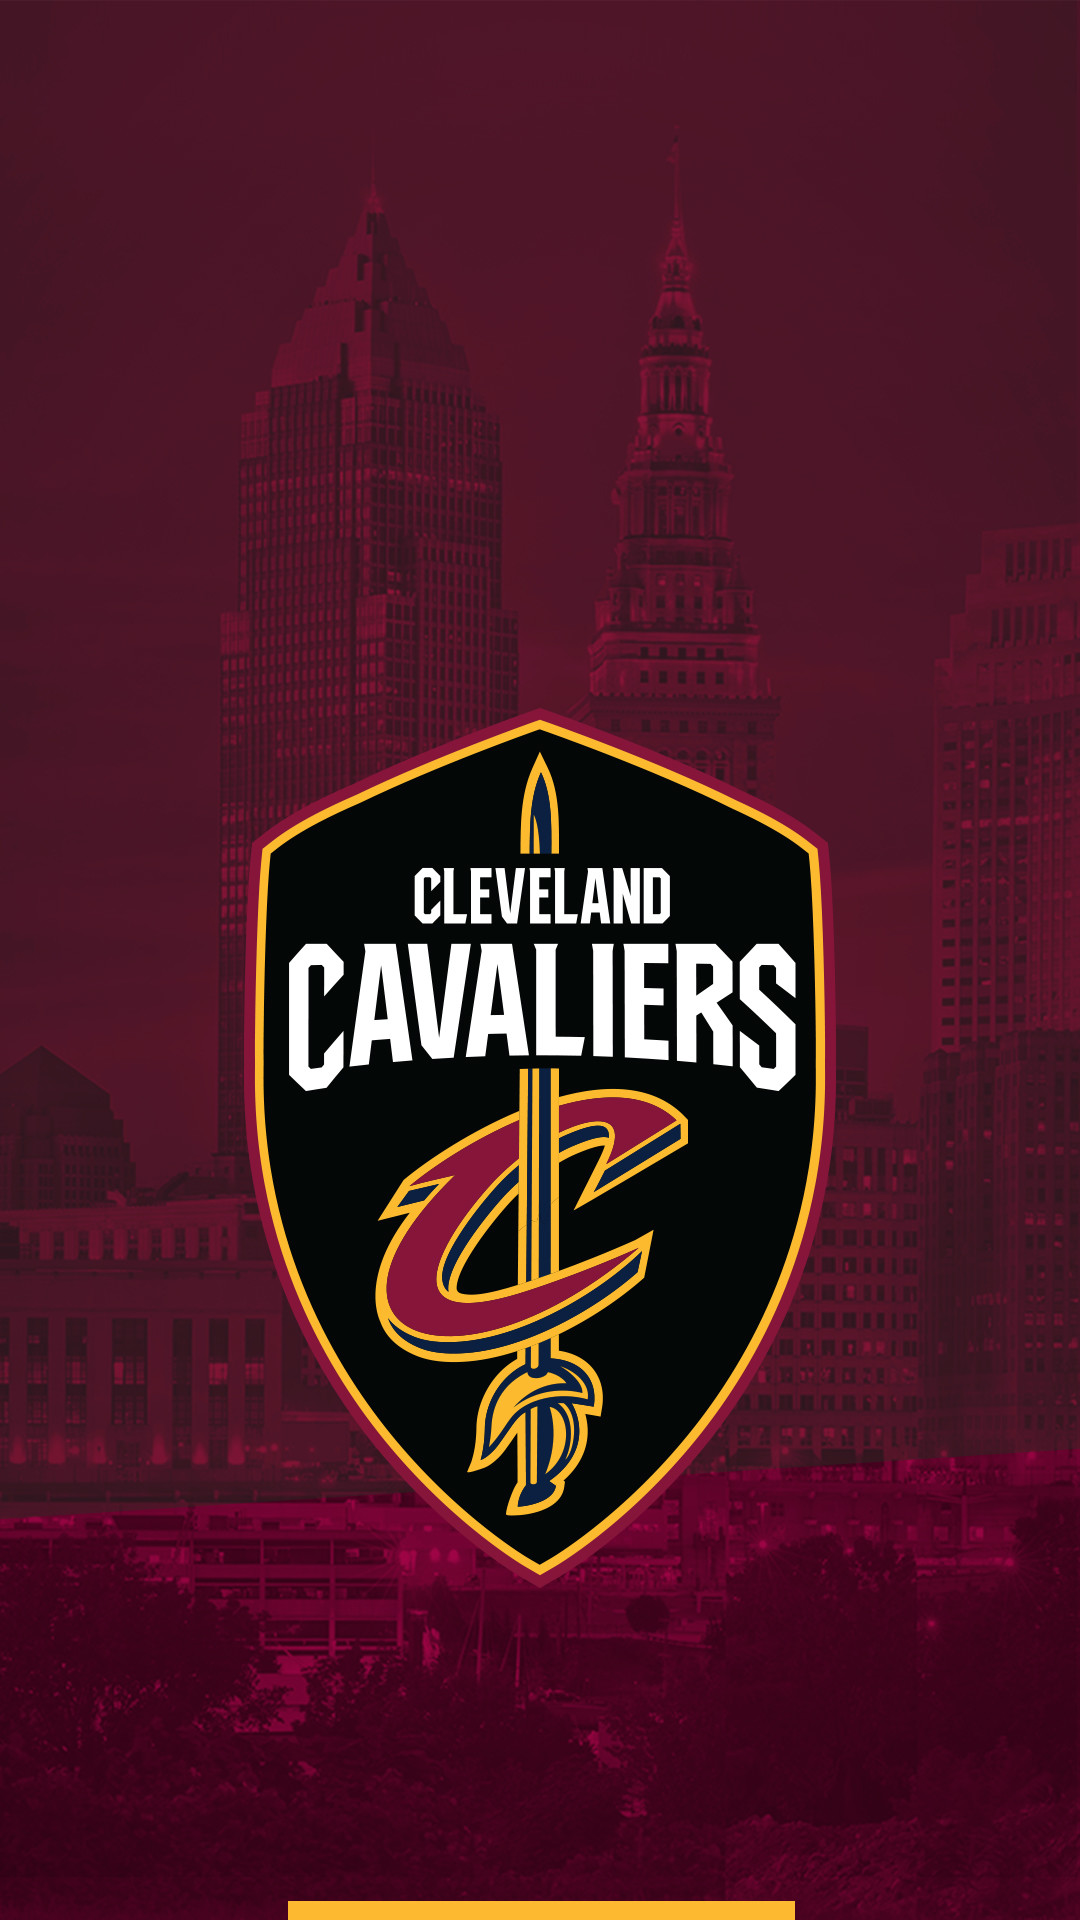 Cleveland Cavaliers Wallpapers HD Wallpapers Download Free Map Images Wallpaper [wallpaper684.blogspot.com]